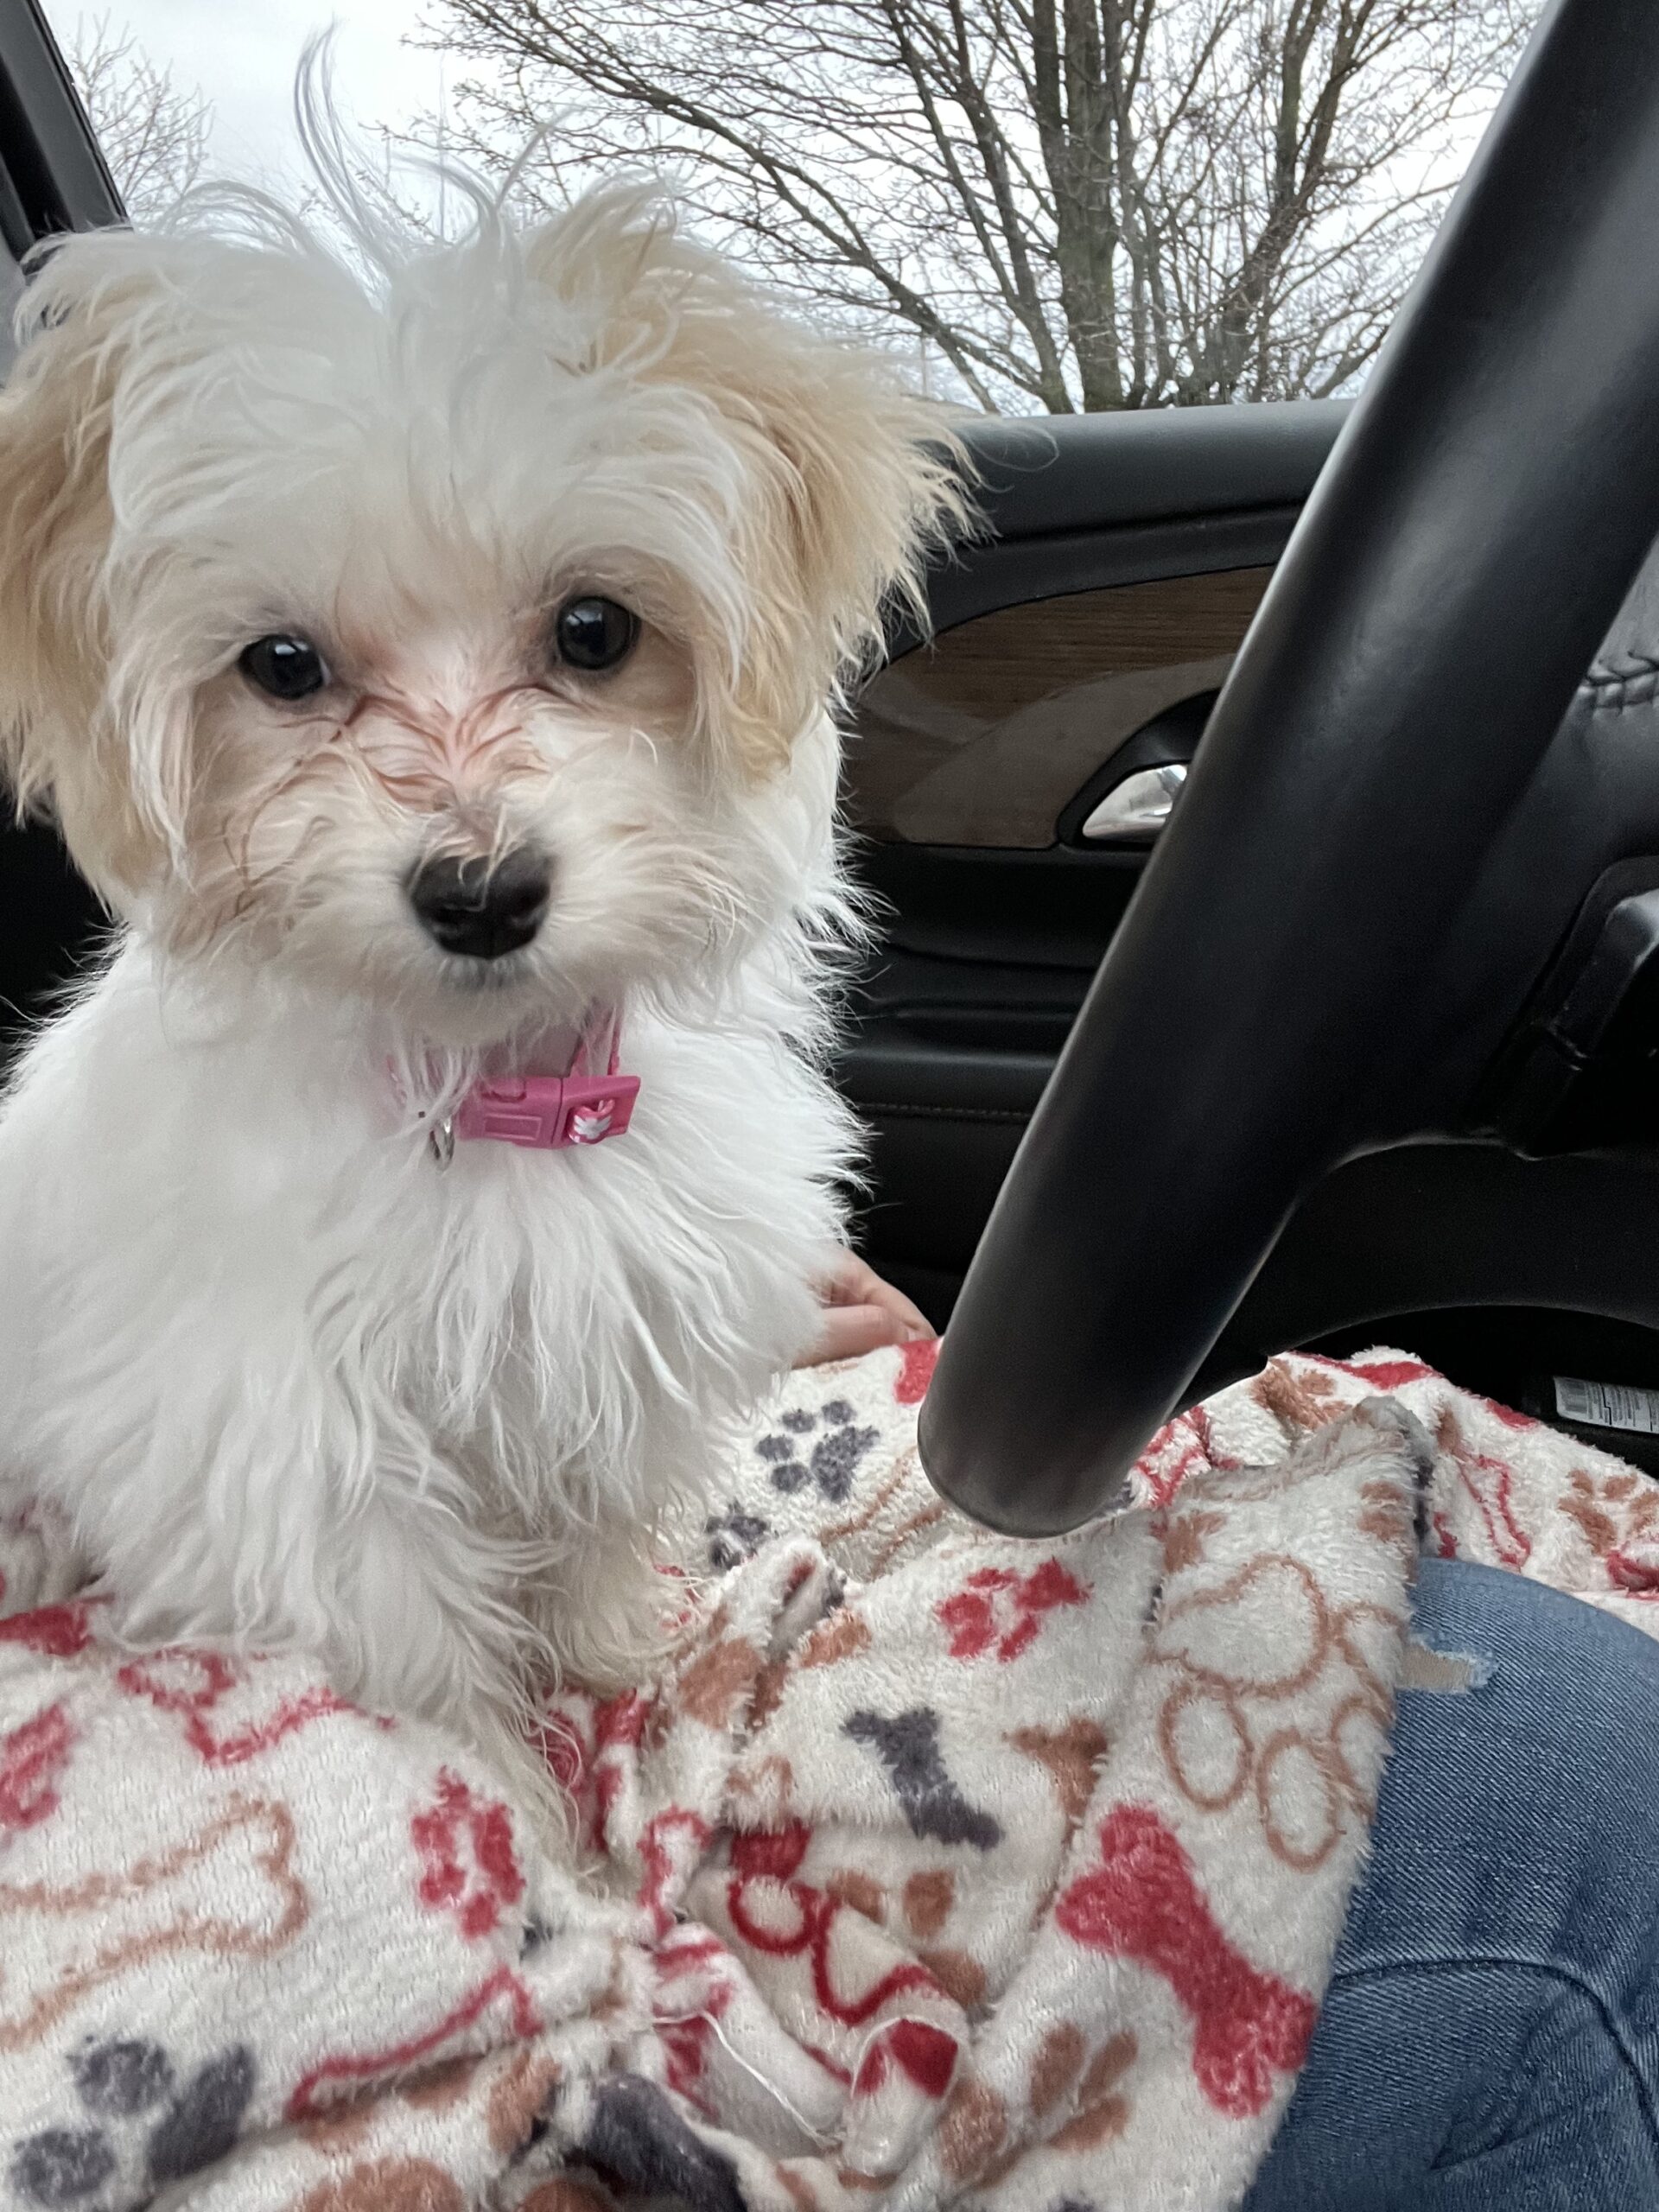 Libby the Maltipoo Review